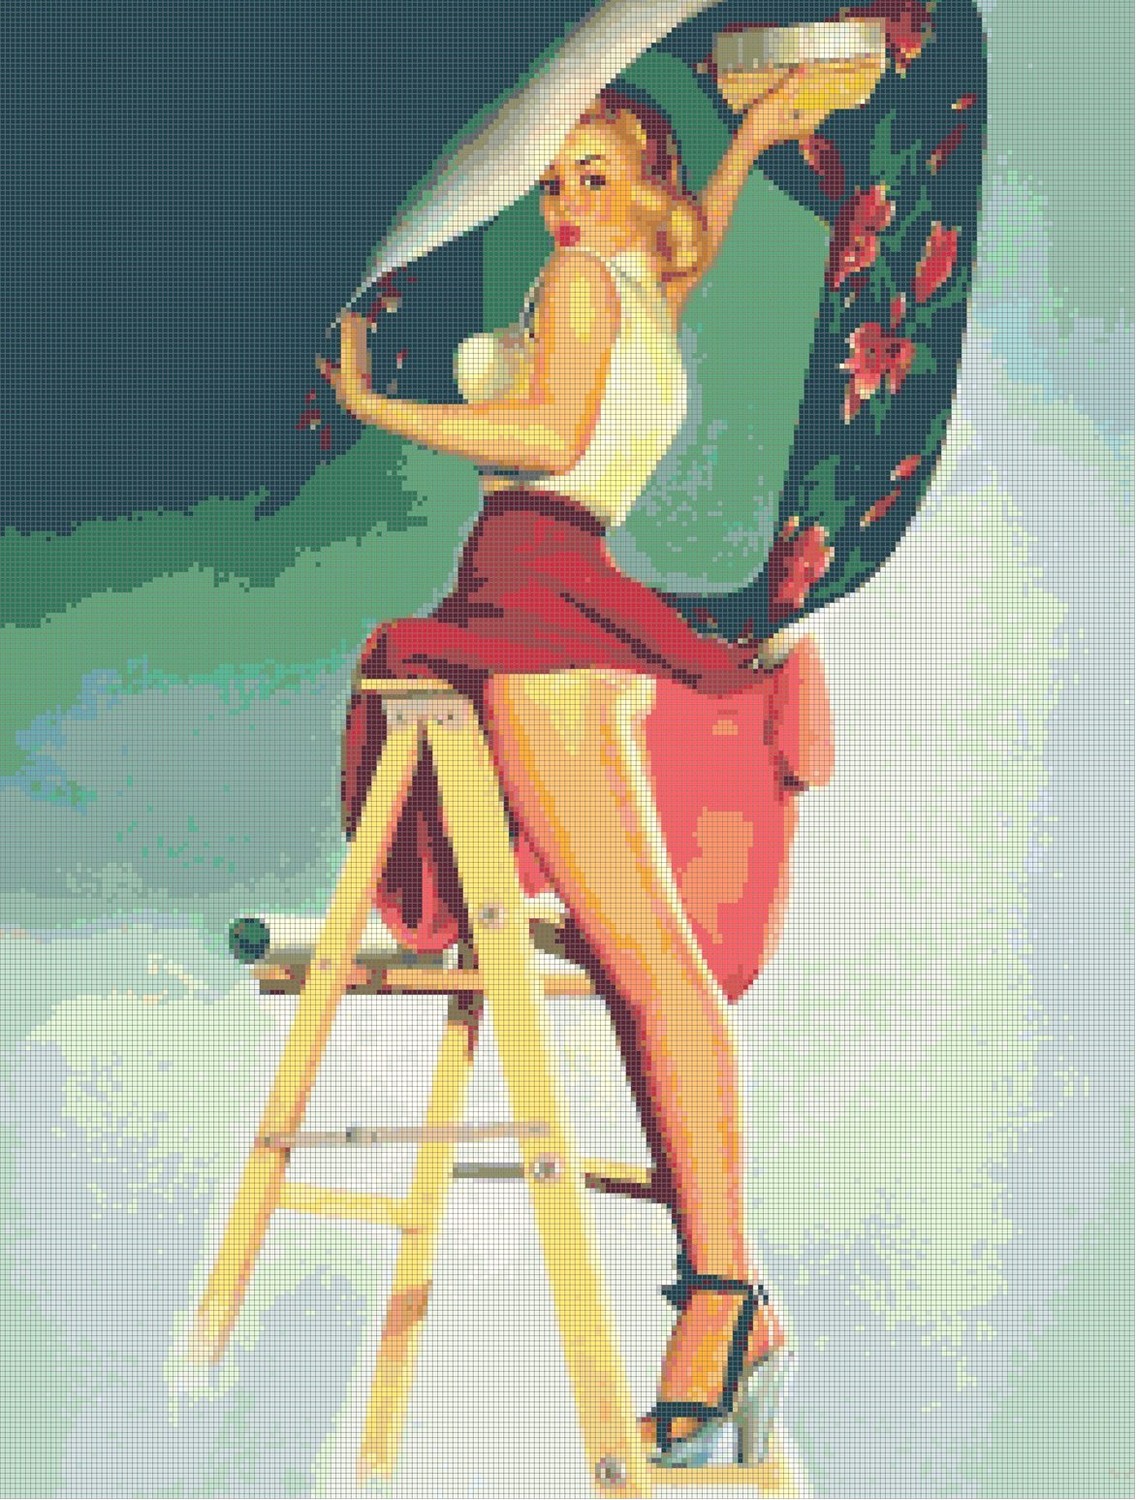 Details About Retro Pin Up Putting Wallpaper Cross Stitch Pattern